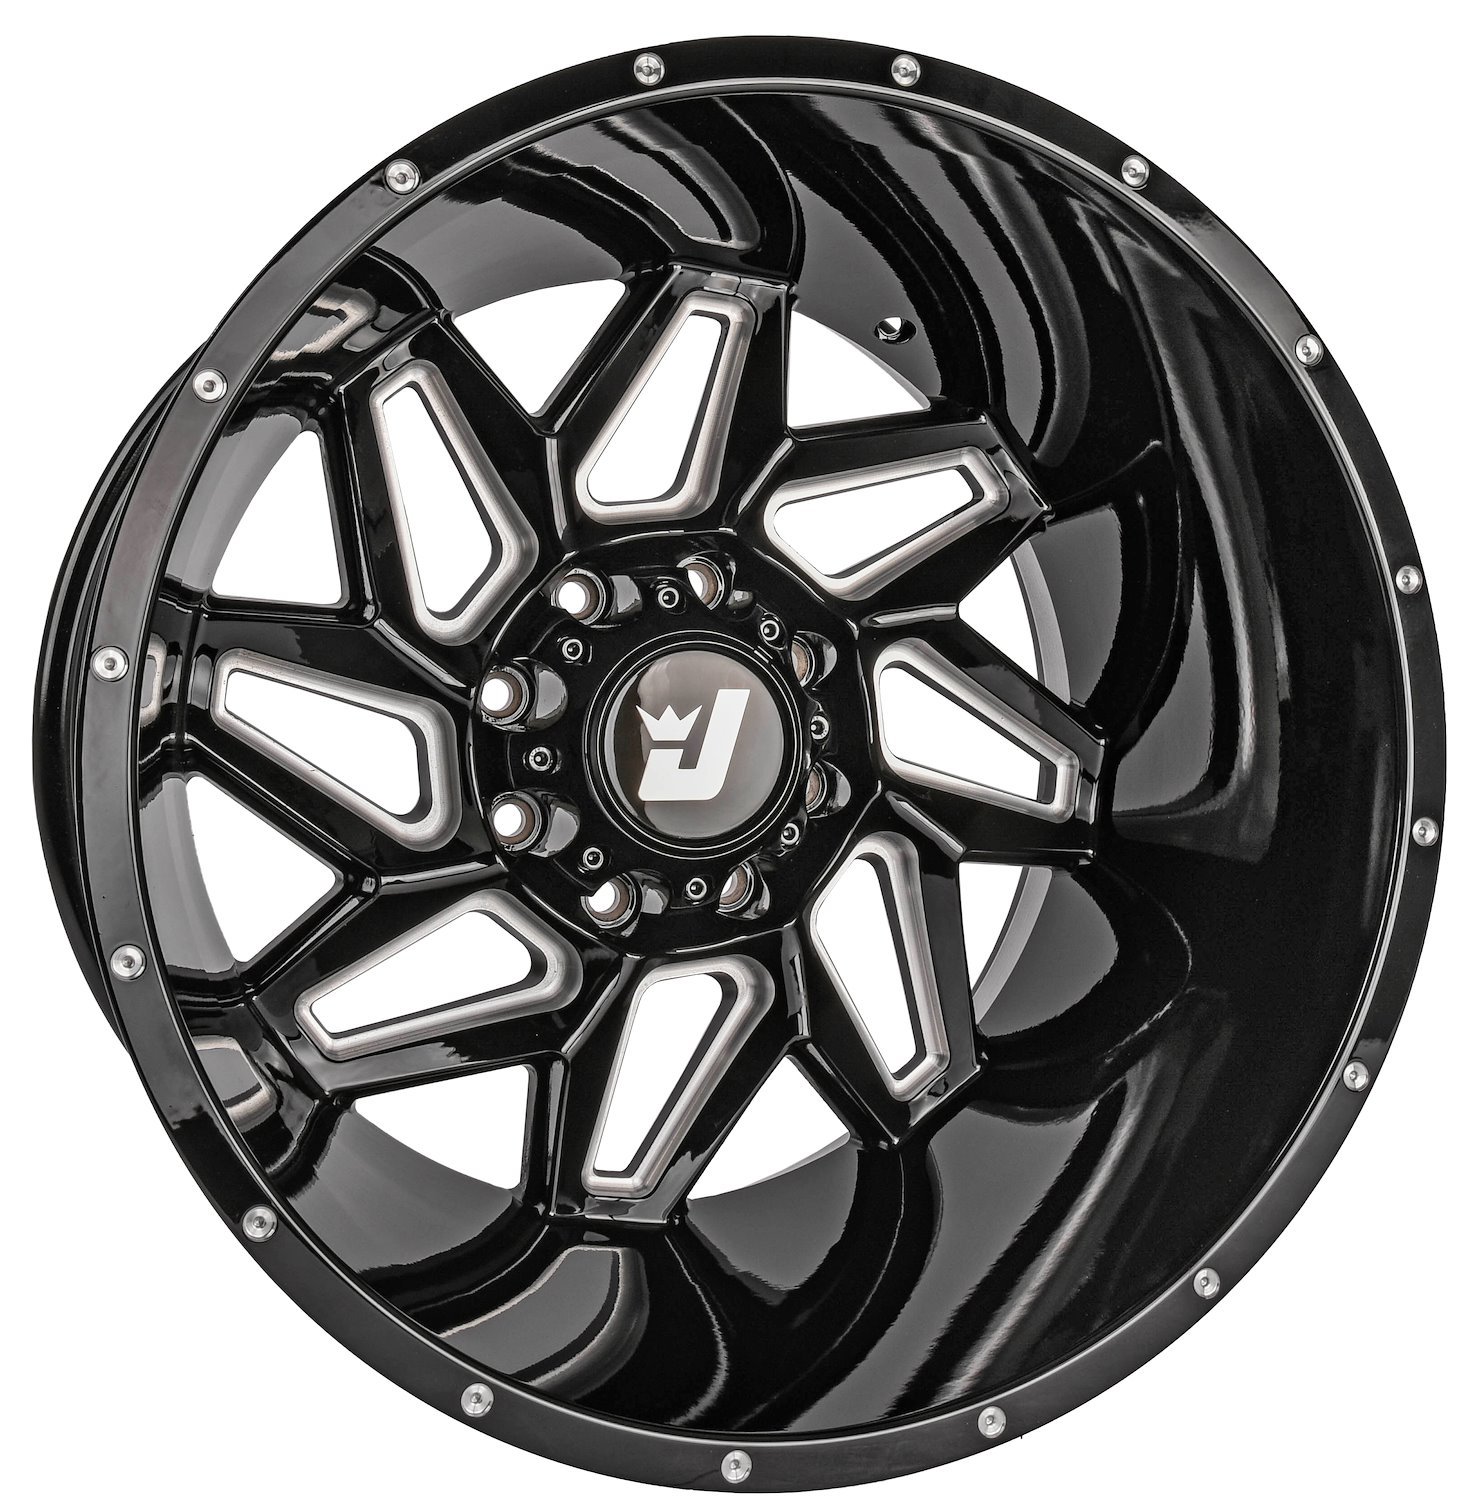 Catalyst Wheel [Size: 22" x 12"] Gloss Black with Milled Spokes